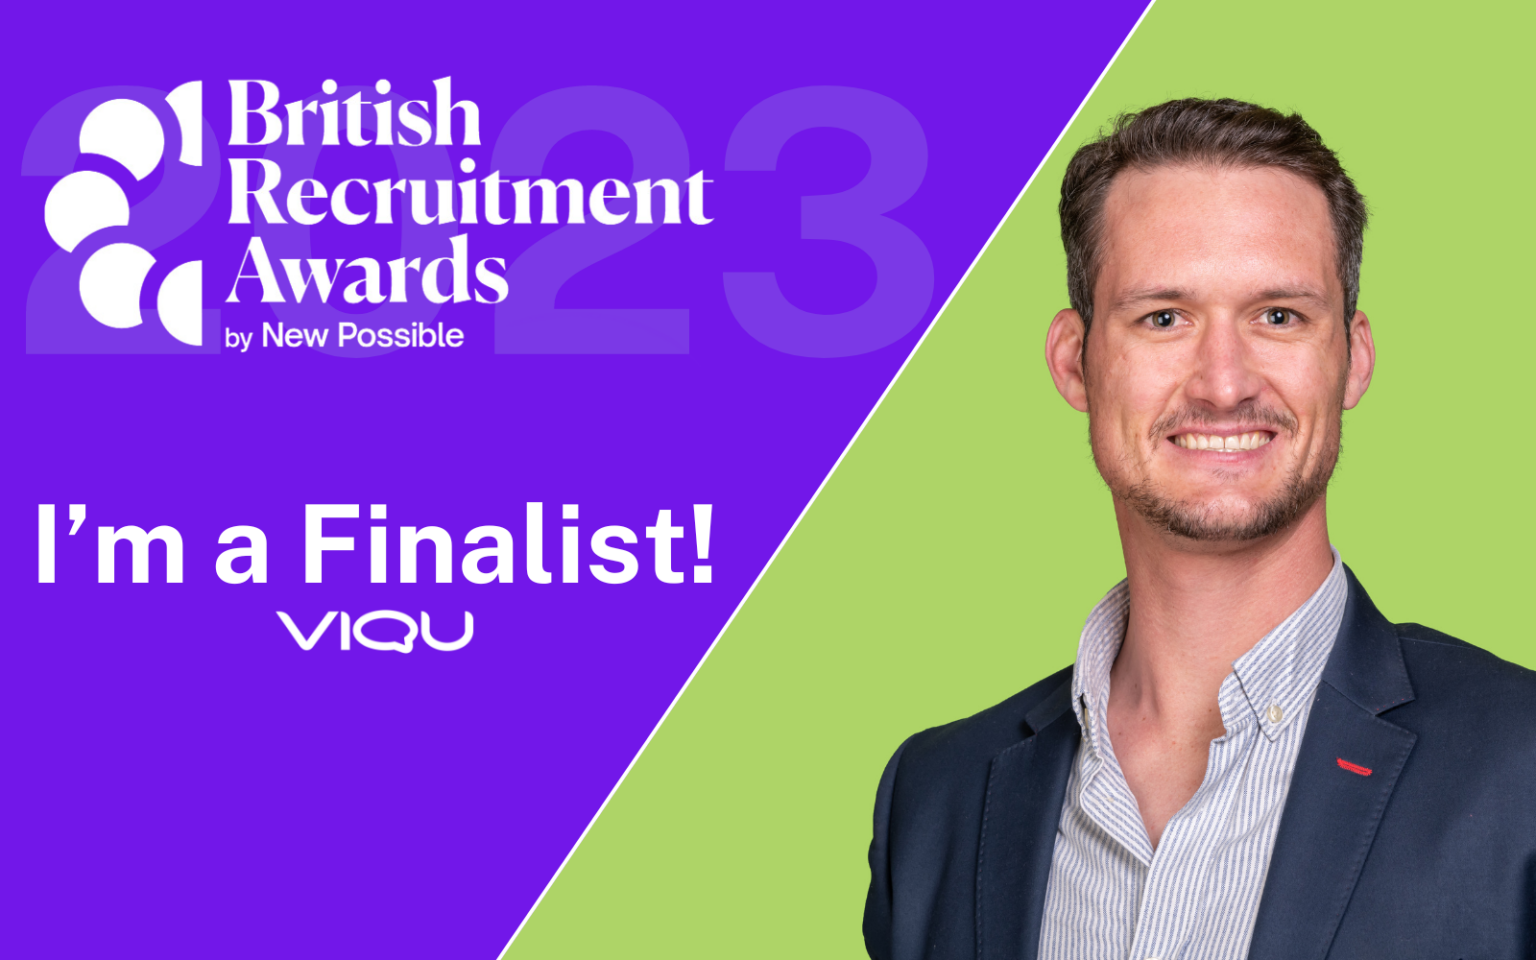 Matthew Hill smiling at camera next to a logo for the British Recruitment Awards